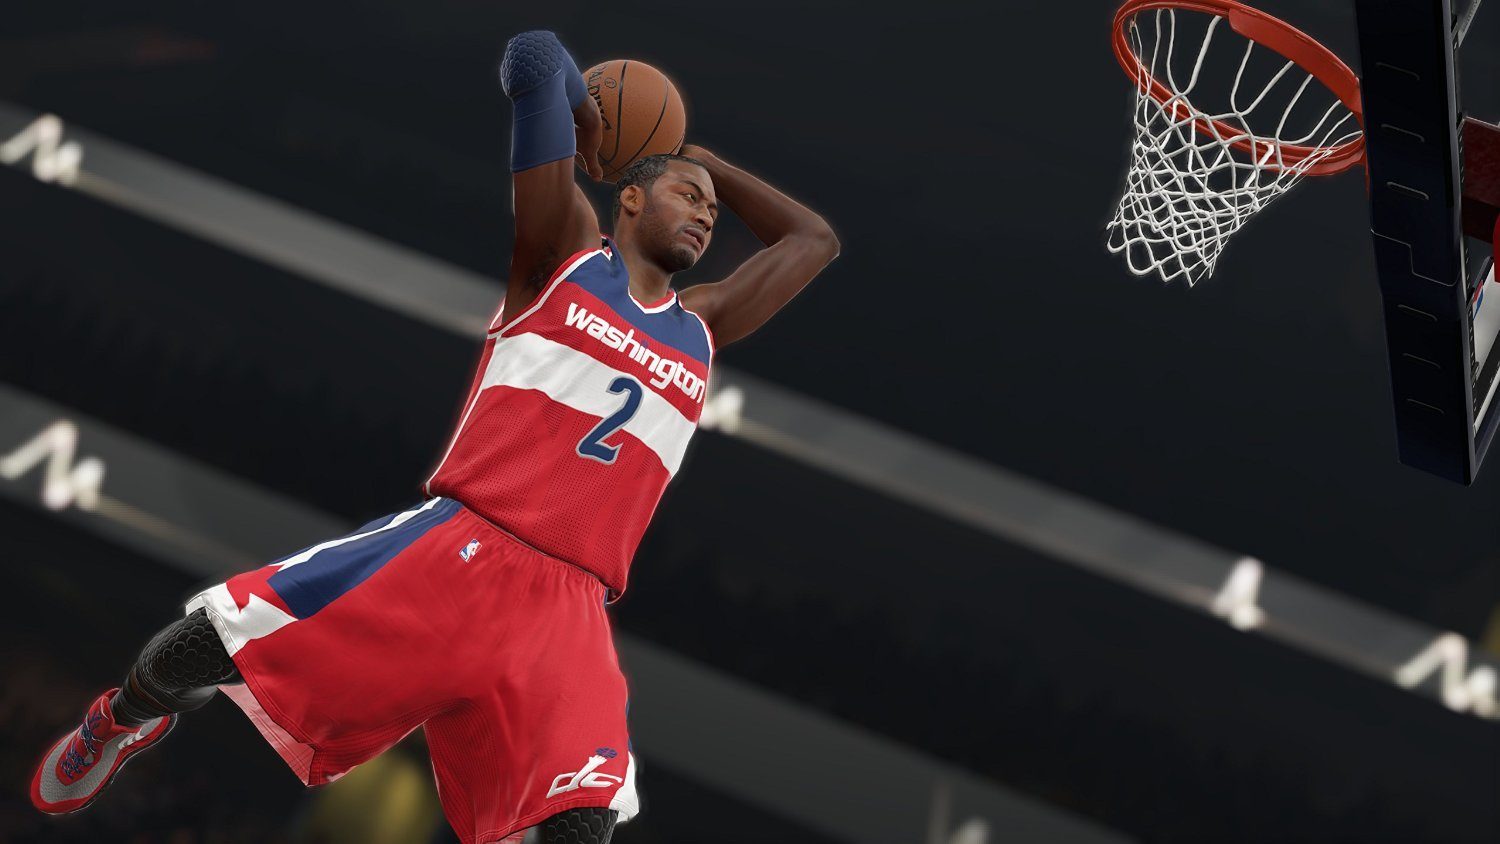 Here's what you need to know to get ready for the NBA 2K15 release date.